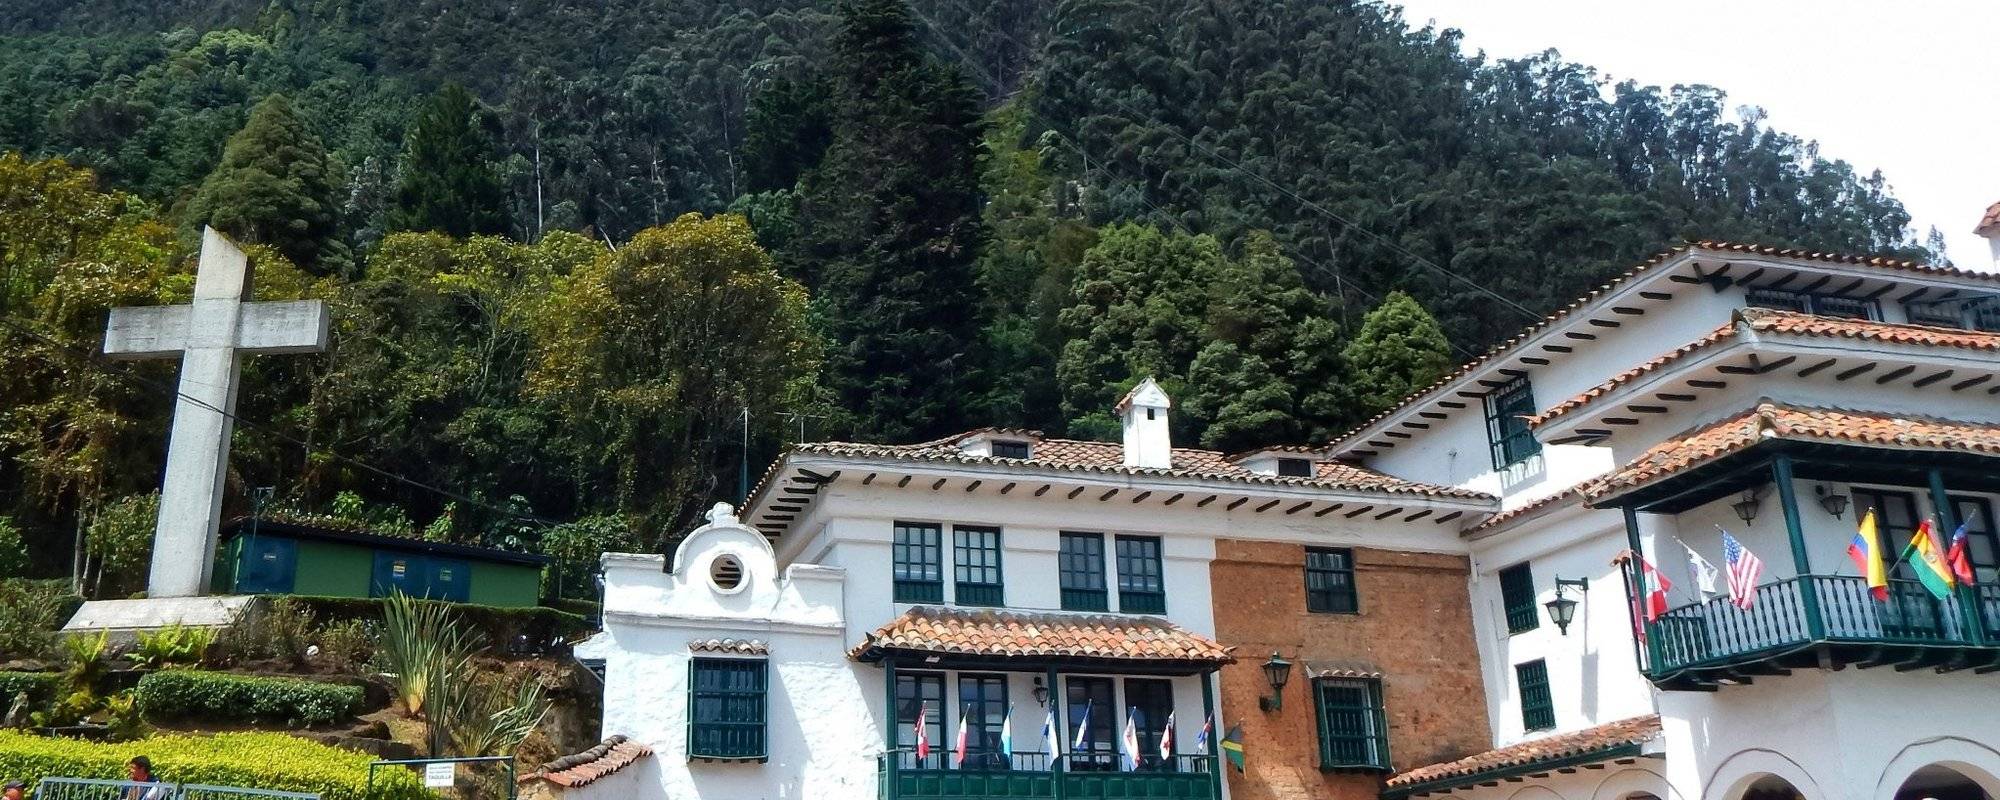 Monserrate: A Beautiful Place That You Can't Miss - Un Hermoso Lugar Qué No Te Puedes Perder